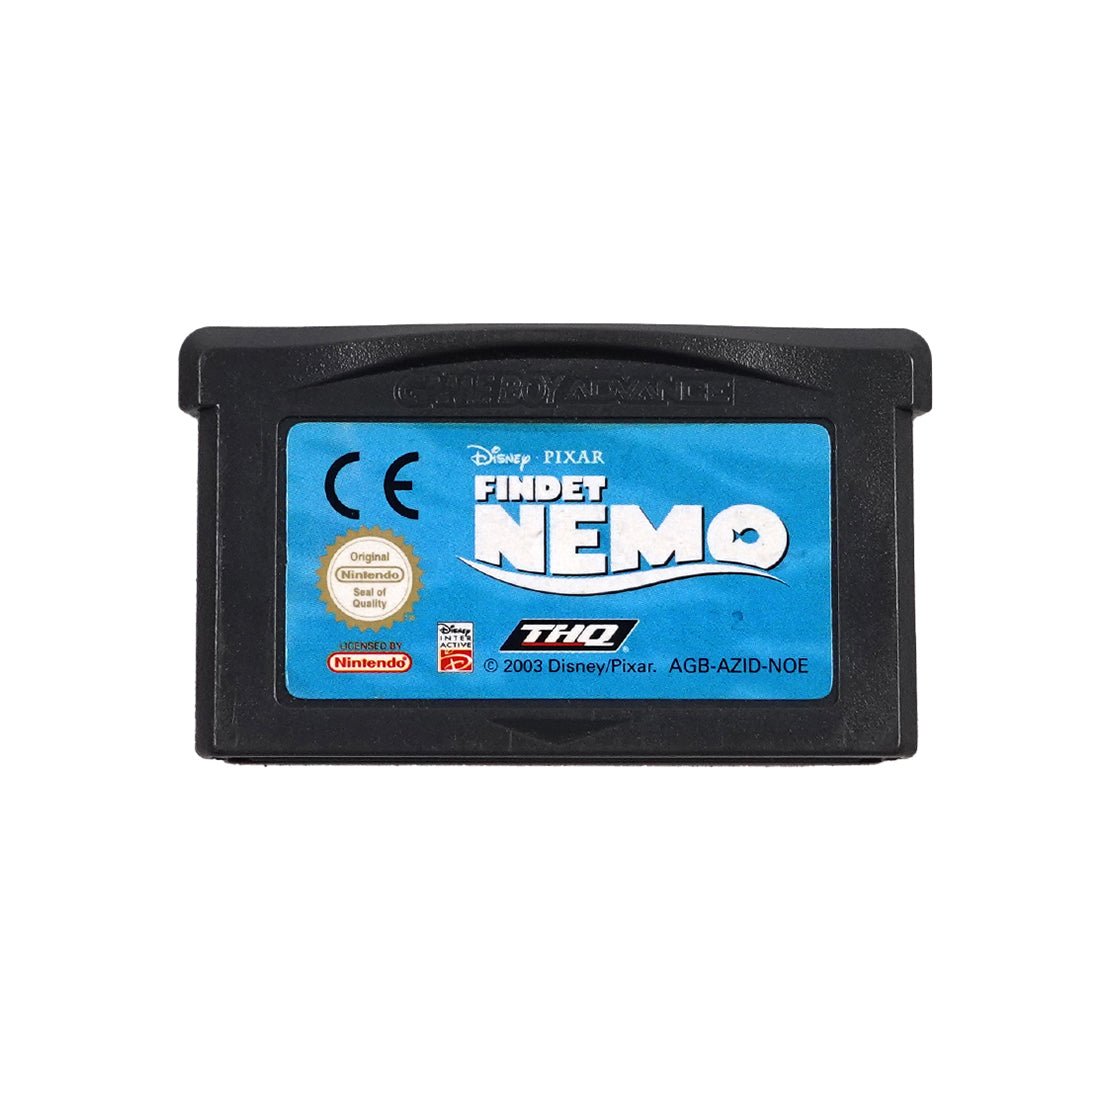 (Pre-Owned) Finding Nemo: German Edition - Gameboy Advance - Store 974 | ستور ٩٧٤